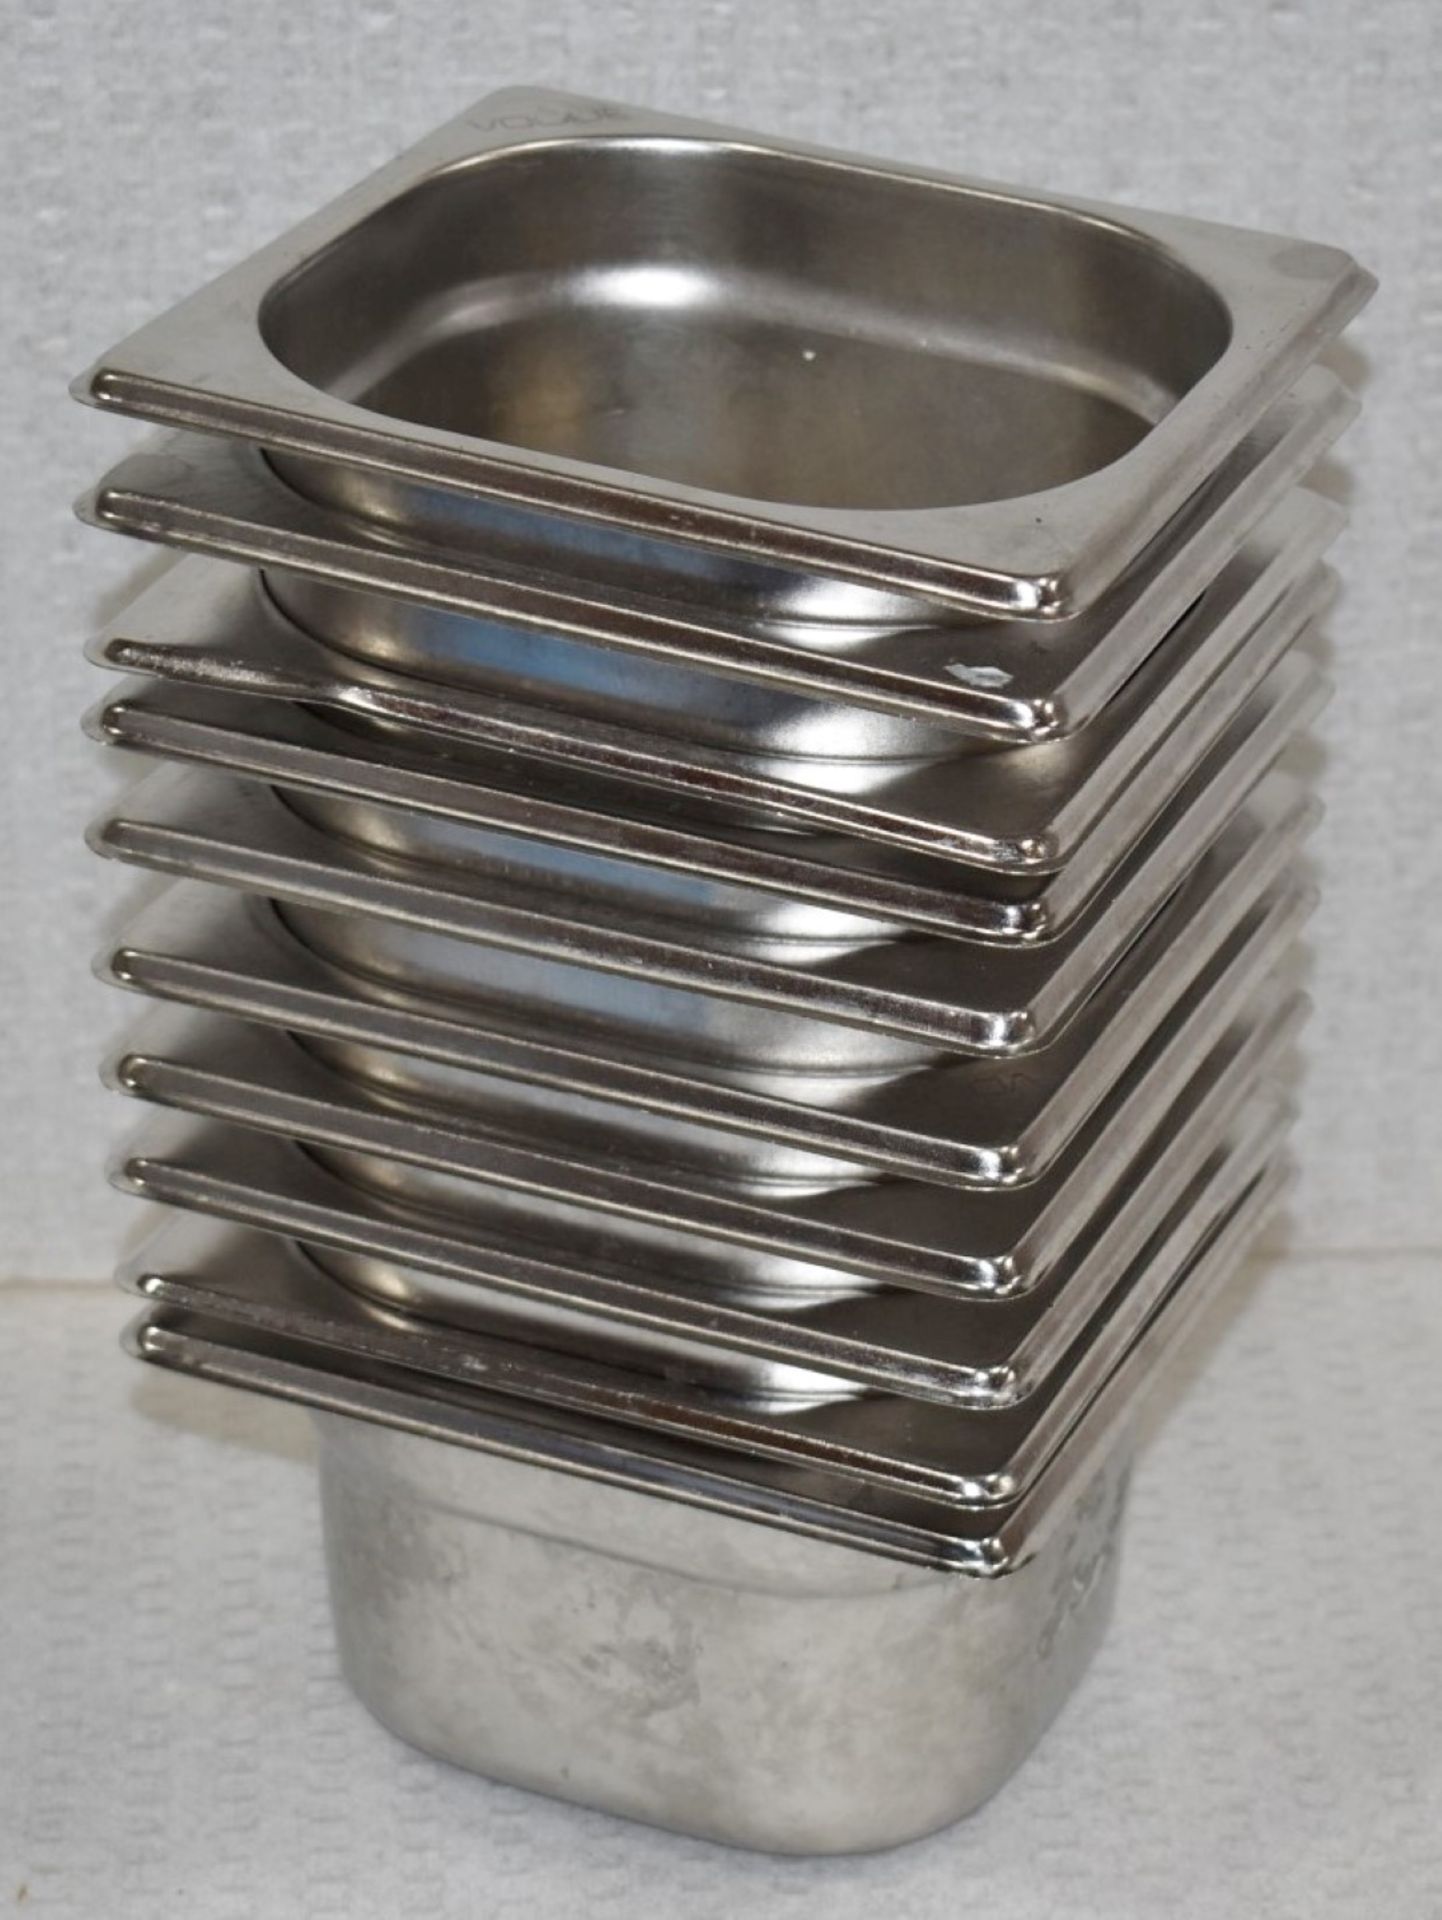 10 x Vogue Stainless Steel Gastronorm Pans Without Lids - Size: H10 x W16 x L17.5 cms - - Image 3 of 3